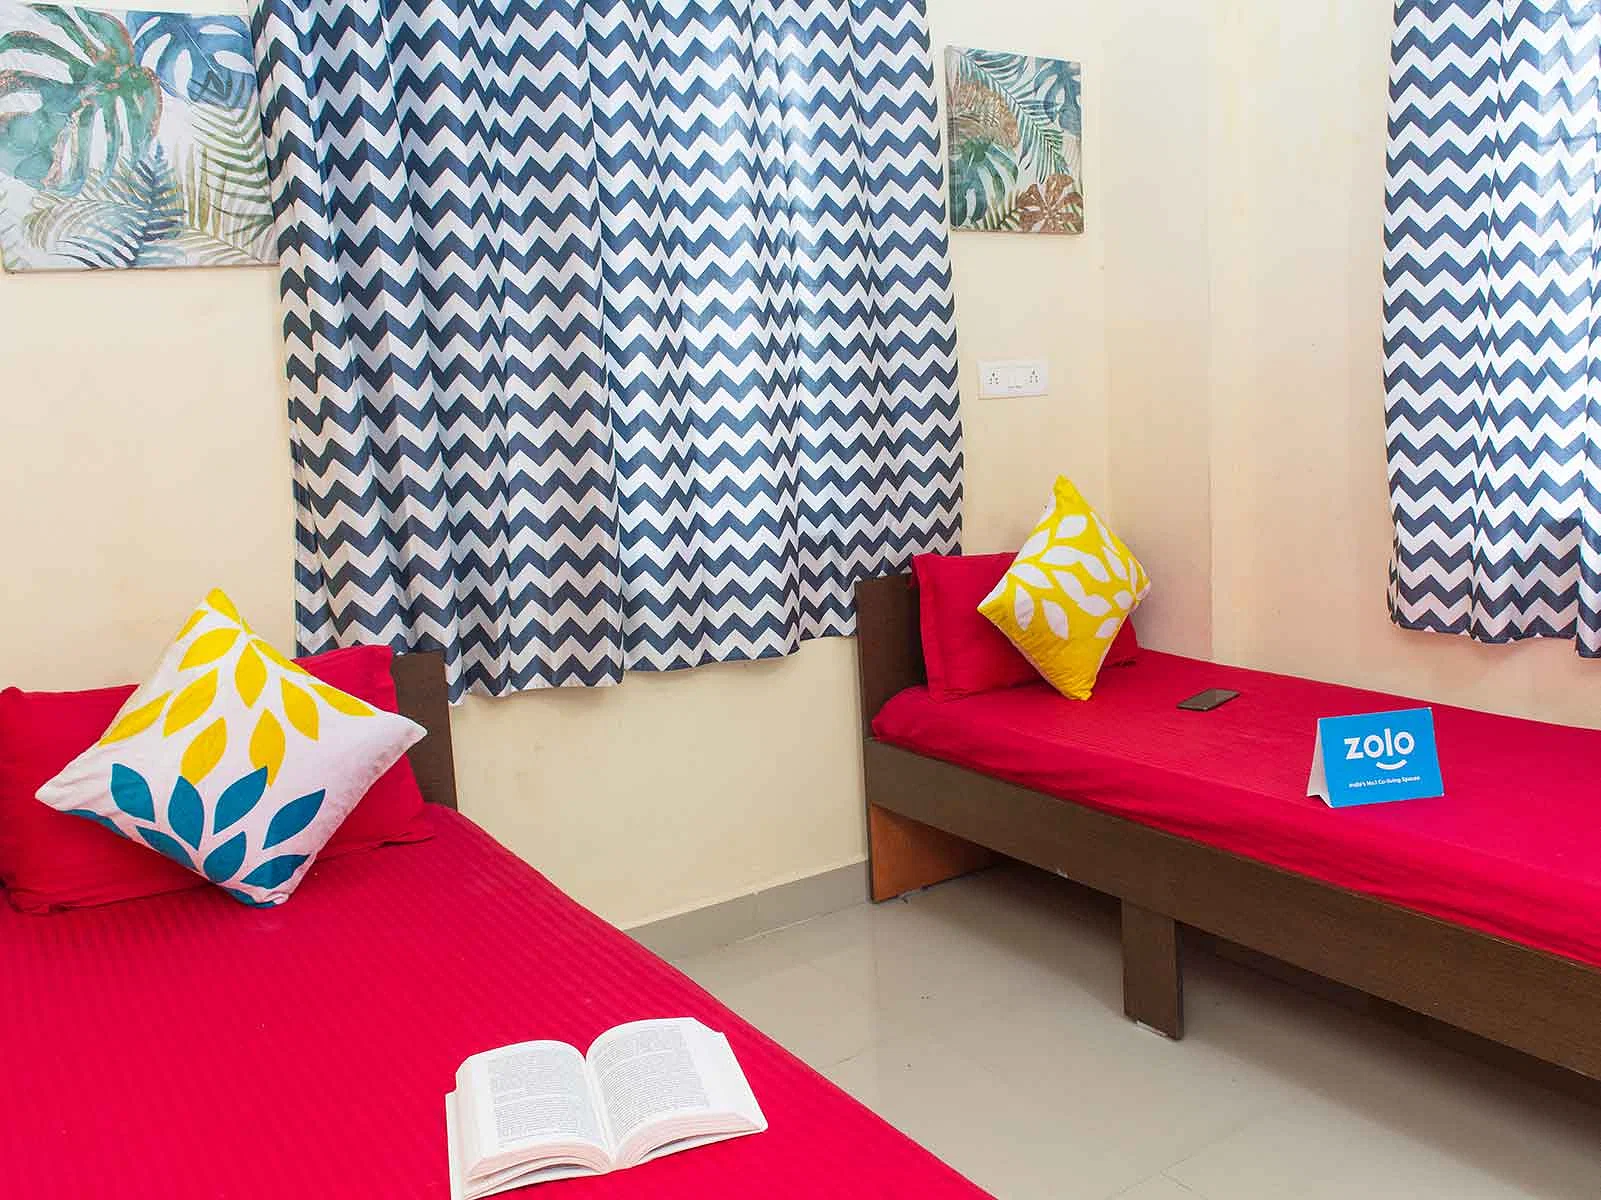 fully furnished Zolo single rooms for rent near me-check out now-Zolo Adroit